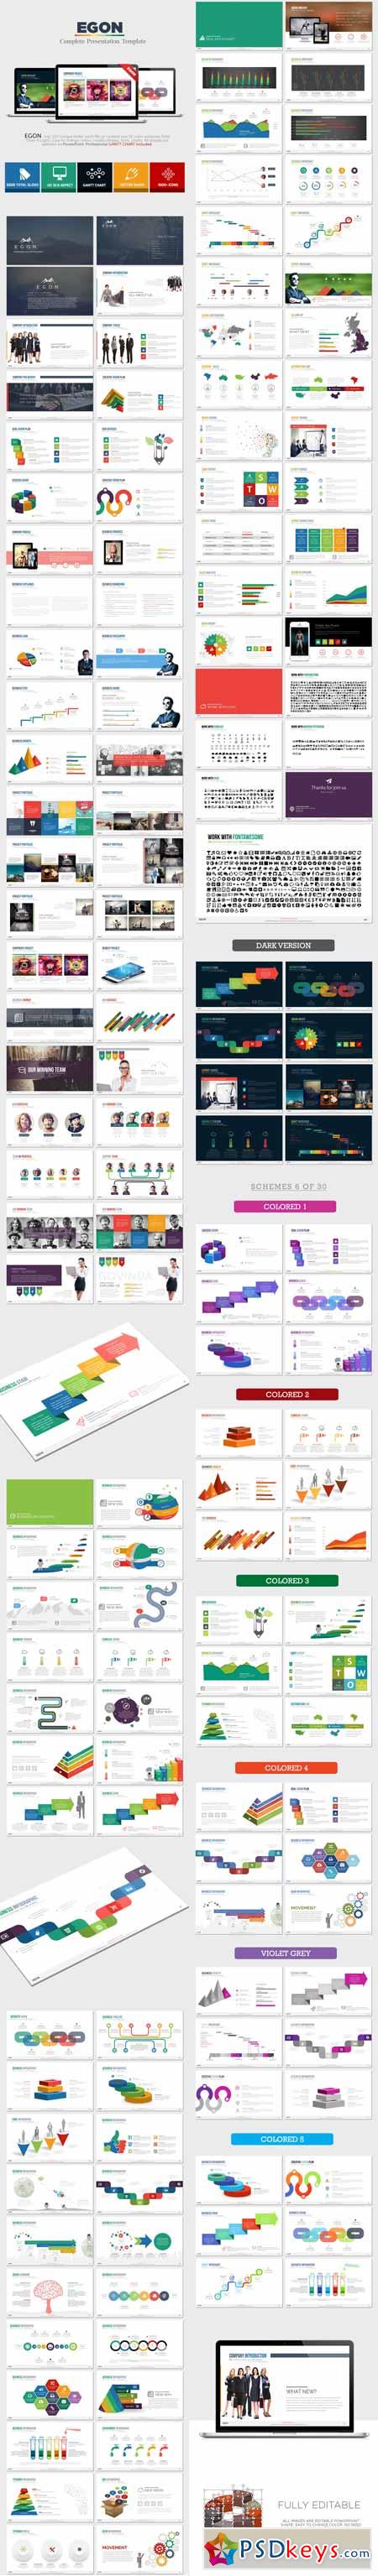 Egon - Complete Powerpoint Template 9804263